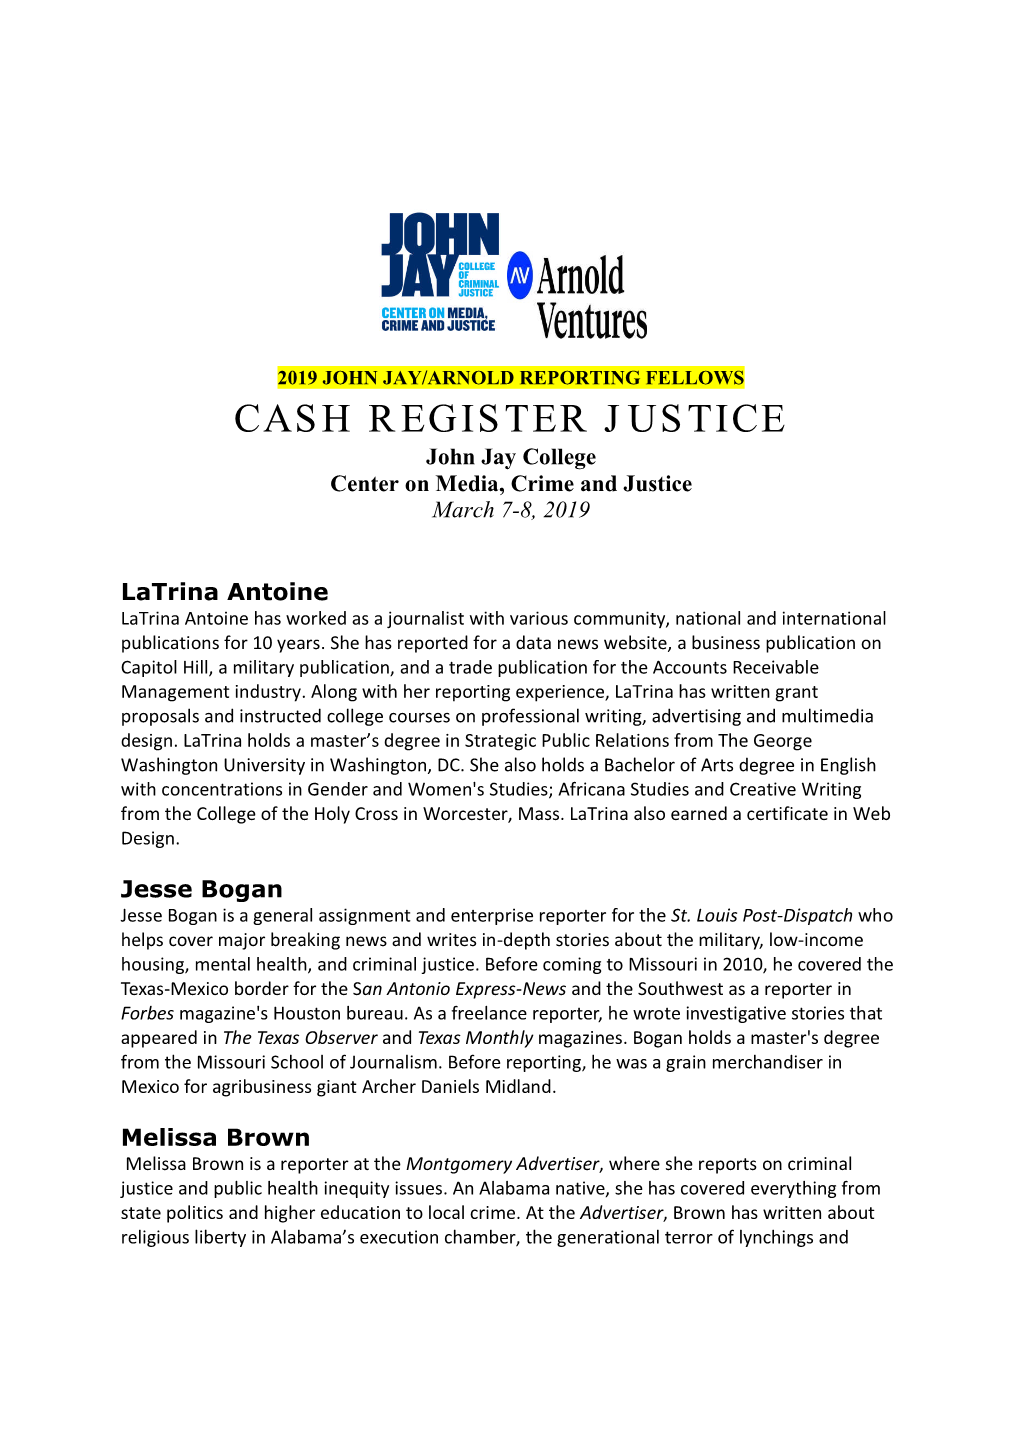 REPORTING FELLOWS CASH REGISTER JUSTICE John Jay College Center on Media, Crime and Justice March 7-8, 2019